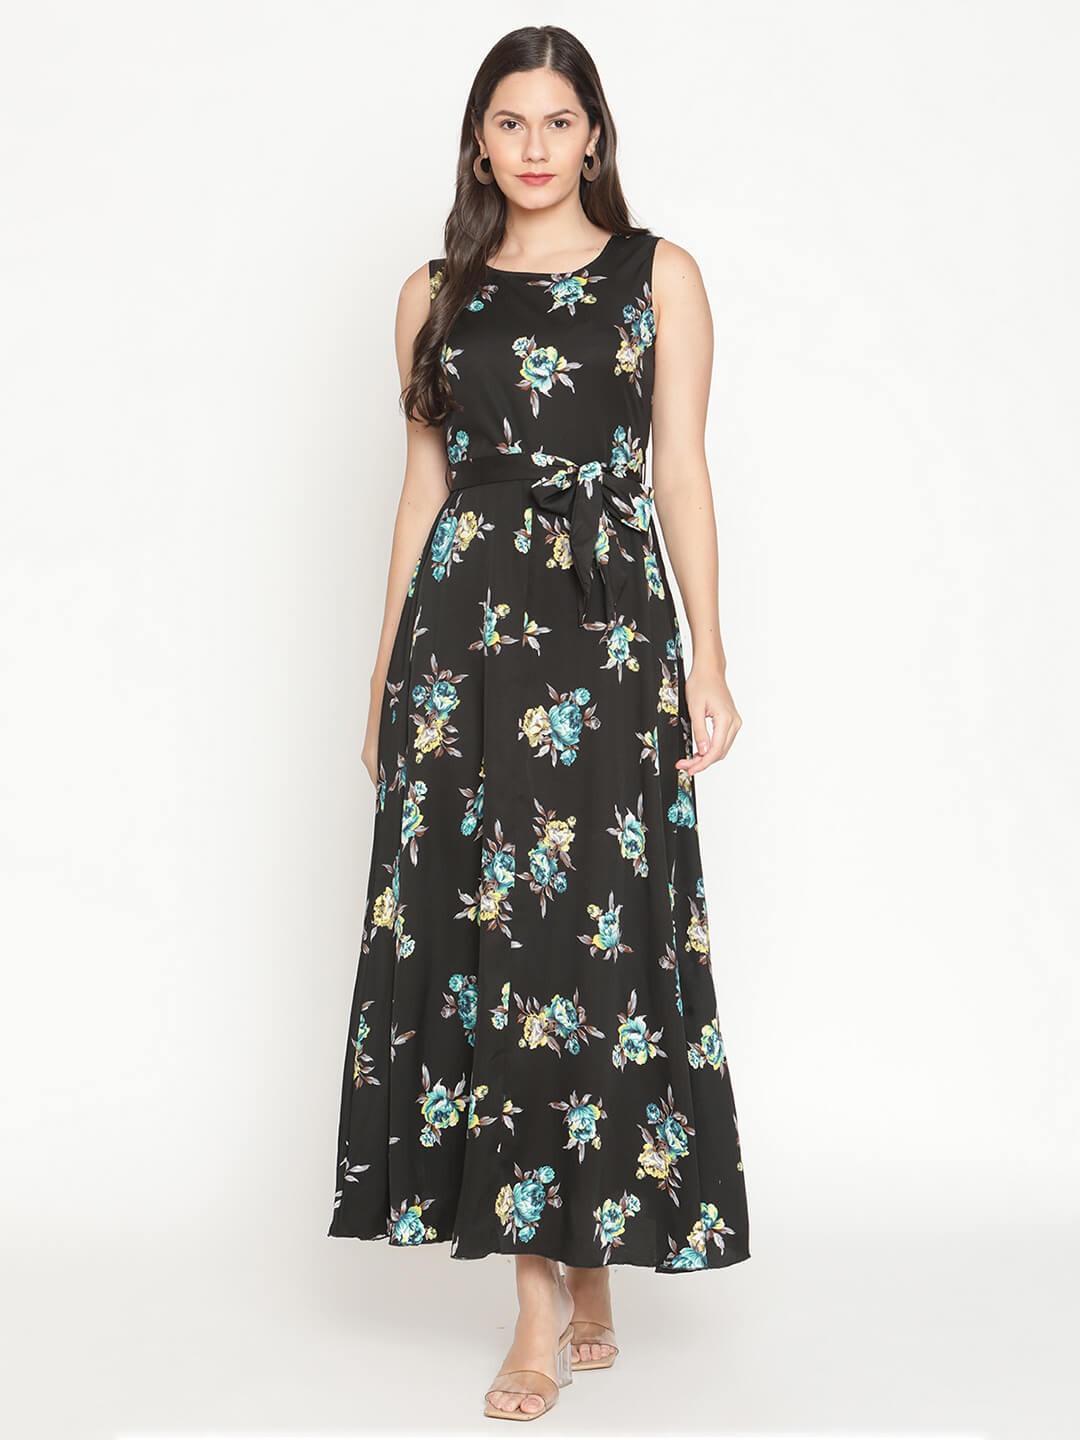 Women'S Flared Printed Maxi Dress With Waist Tie Up